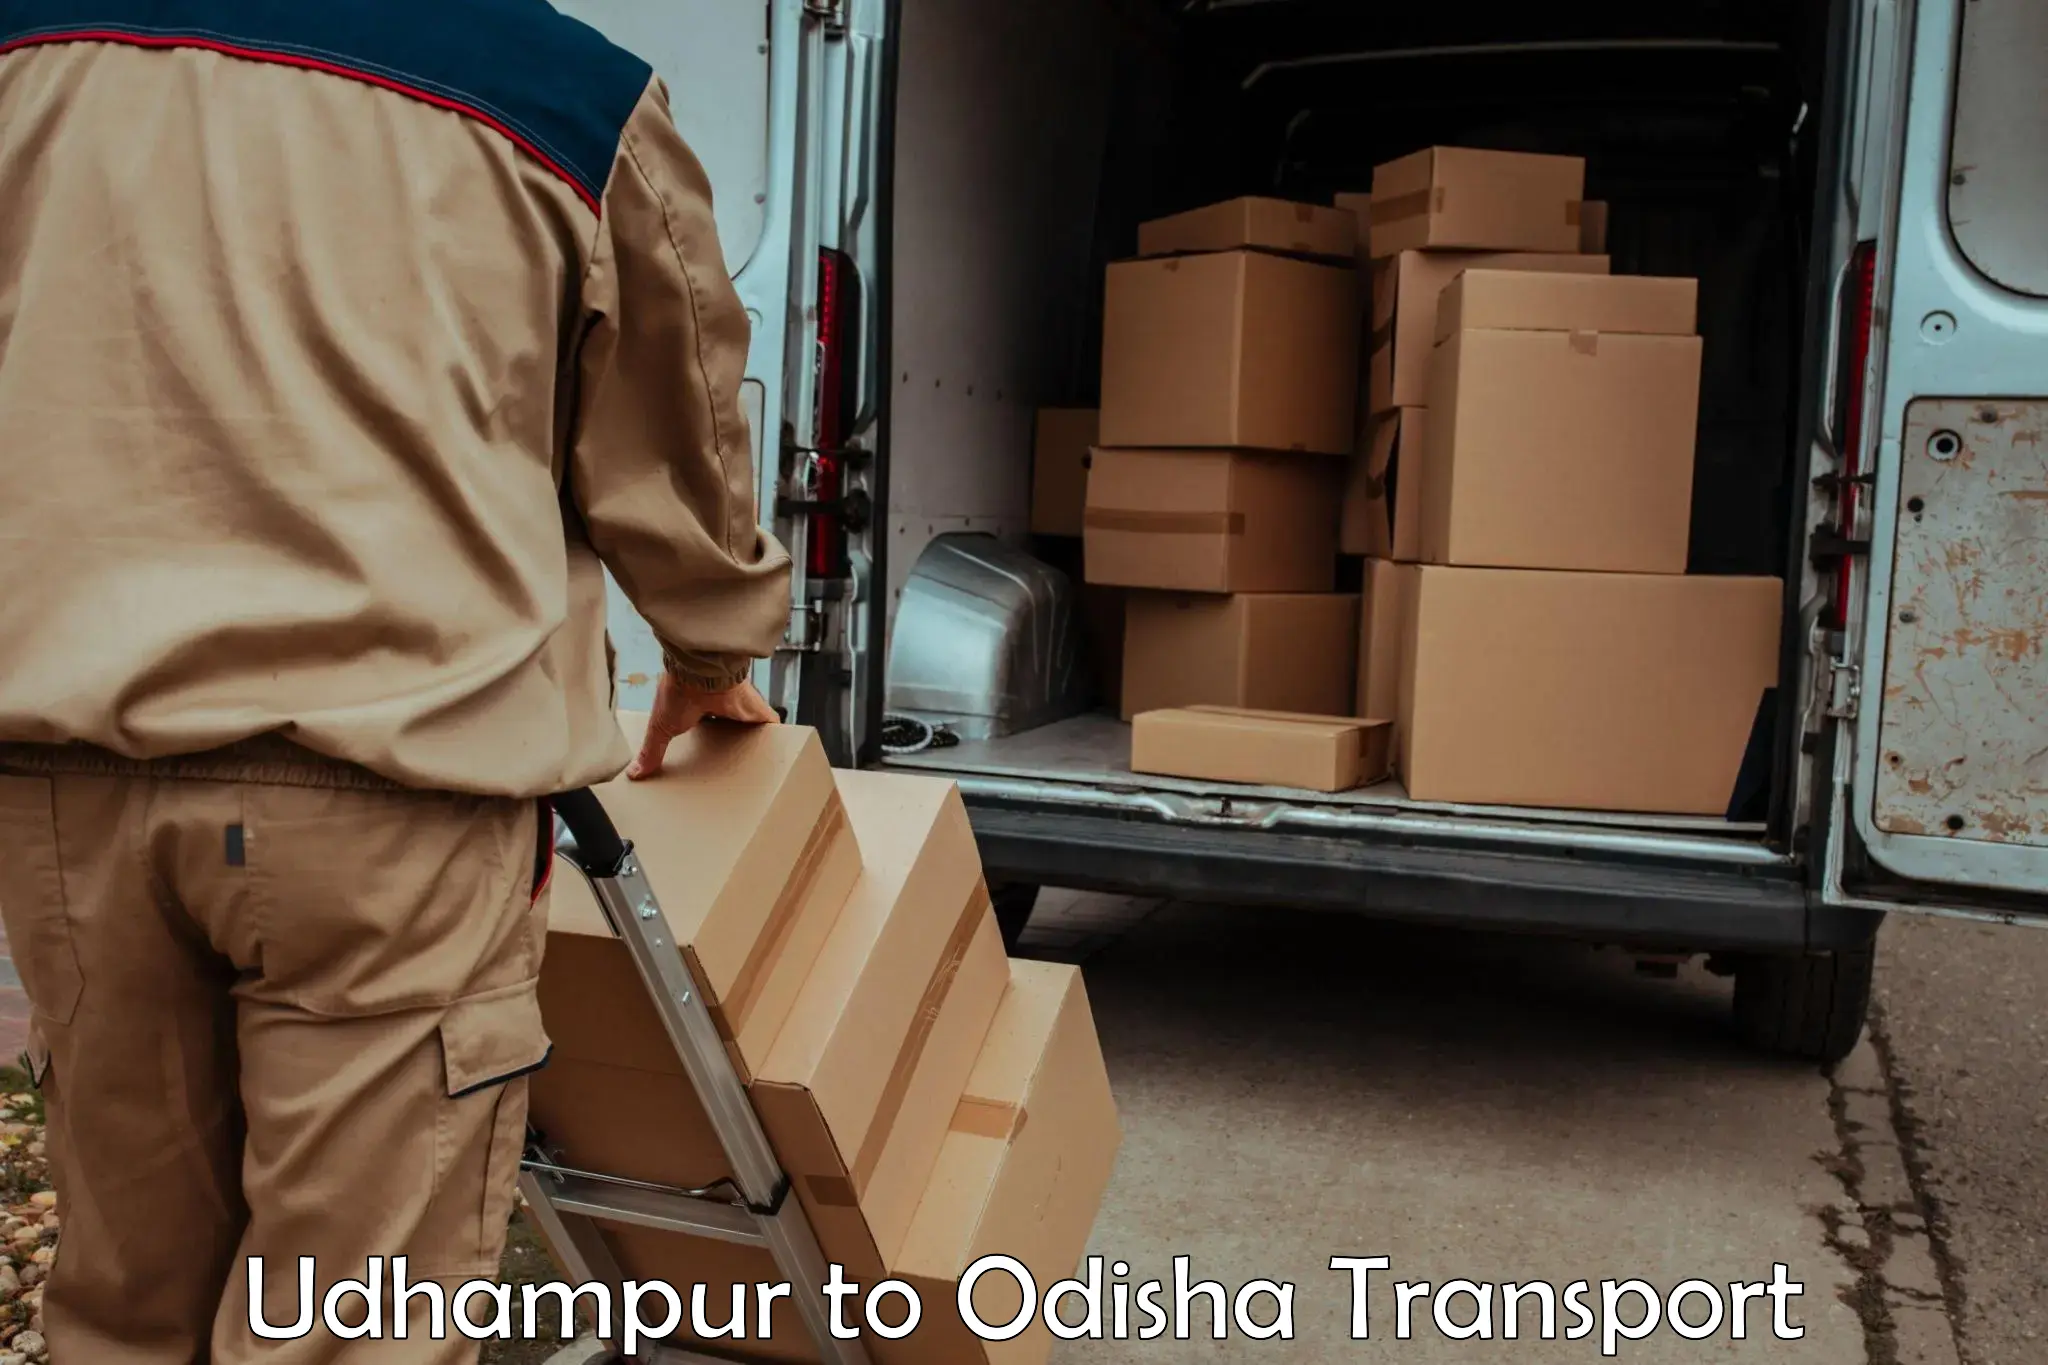 Cargo transport services in Udhampur to Bhubaneswar